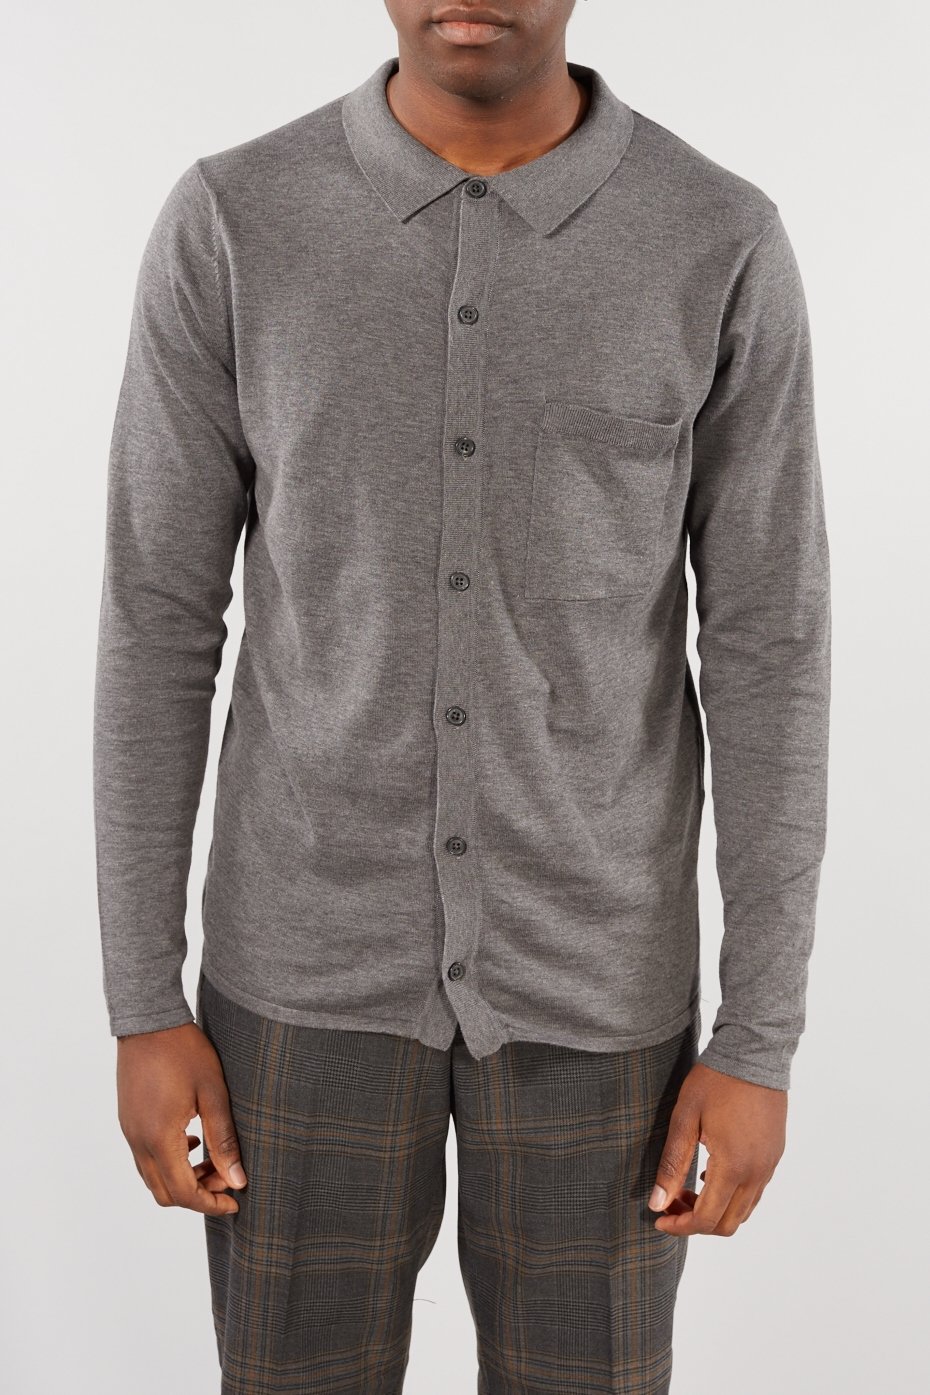 Selected Homme Grey Knit Eli Polo Cardigan